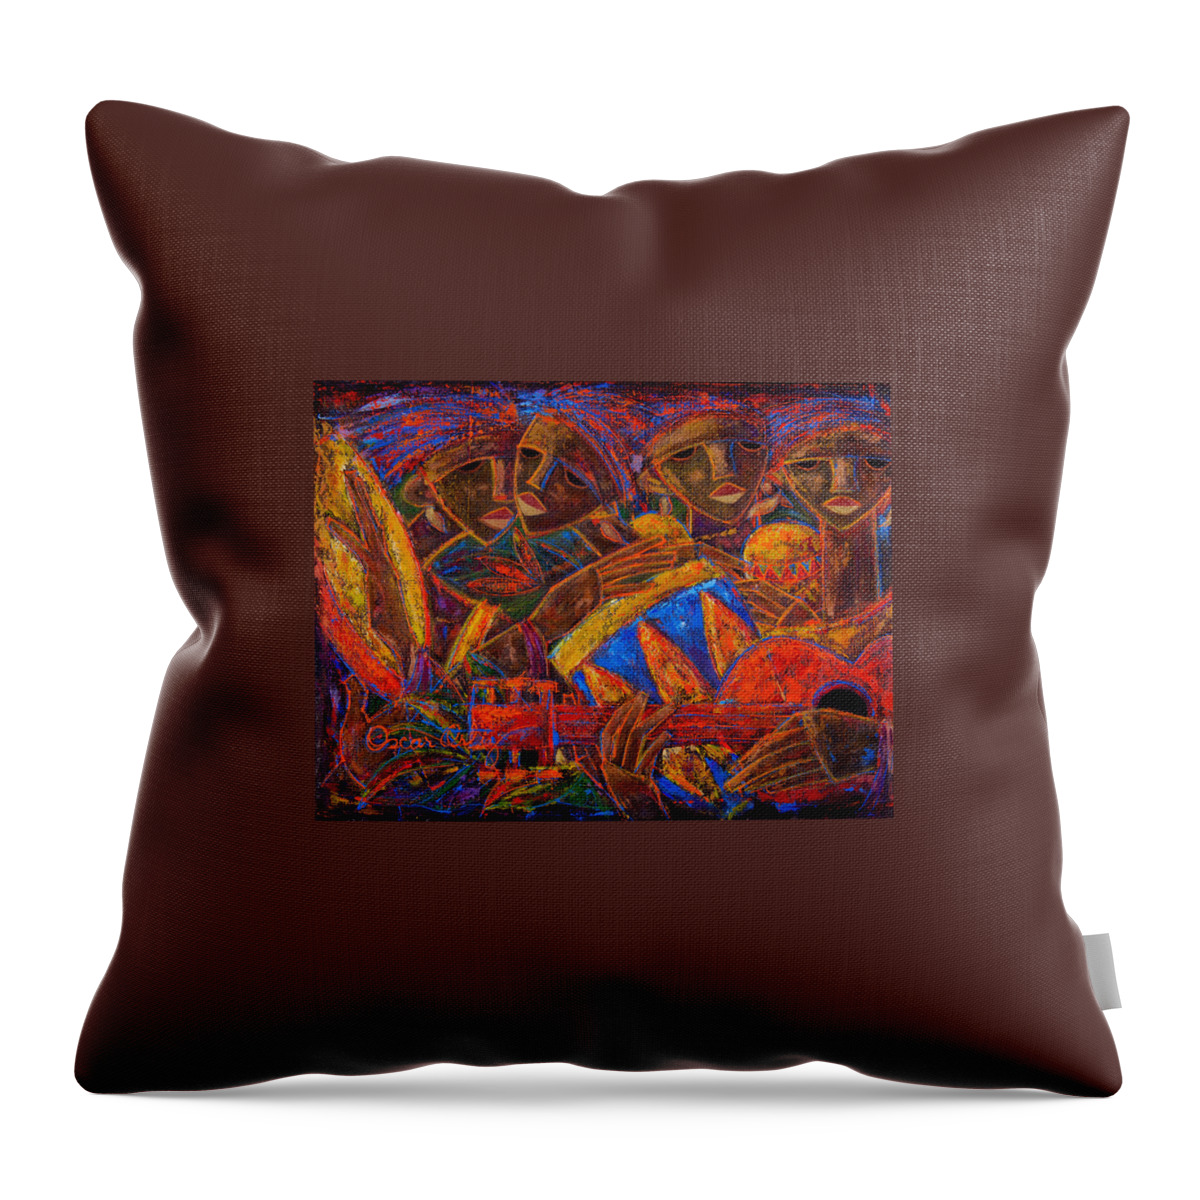 Colorful Throw Pillow featuring the painting Musas Del Caribe by Oscar Ortiz